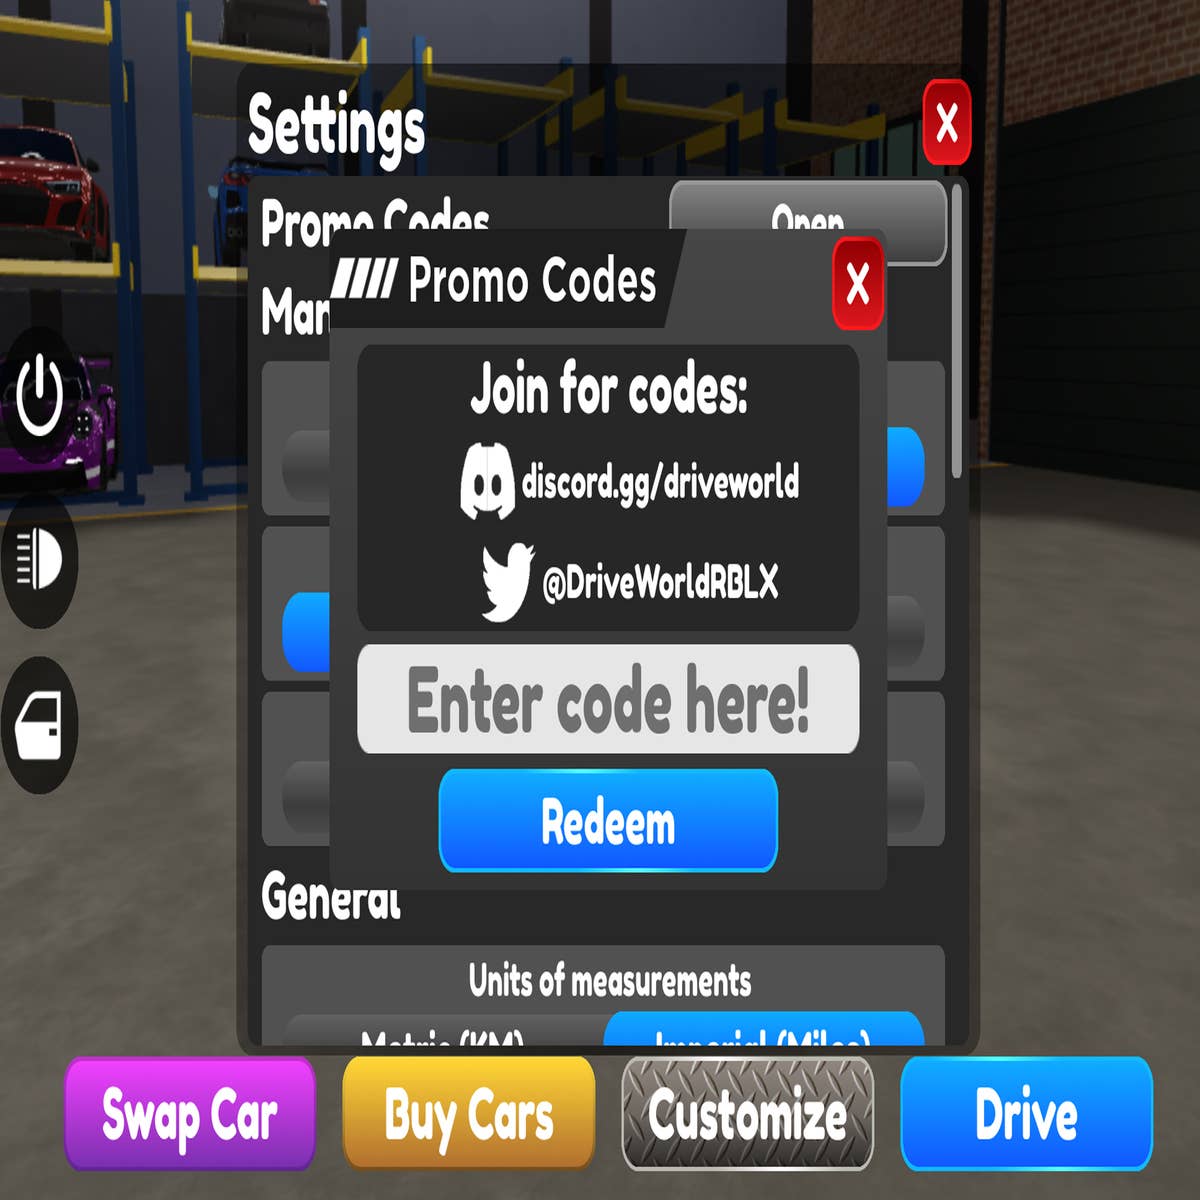 HOW TO ENTER PROMO CODES IN ROBLOX MOBILE APP